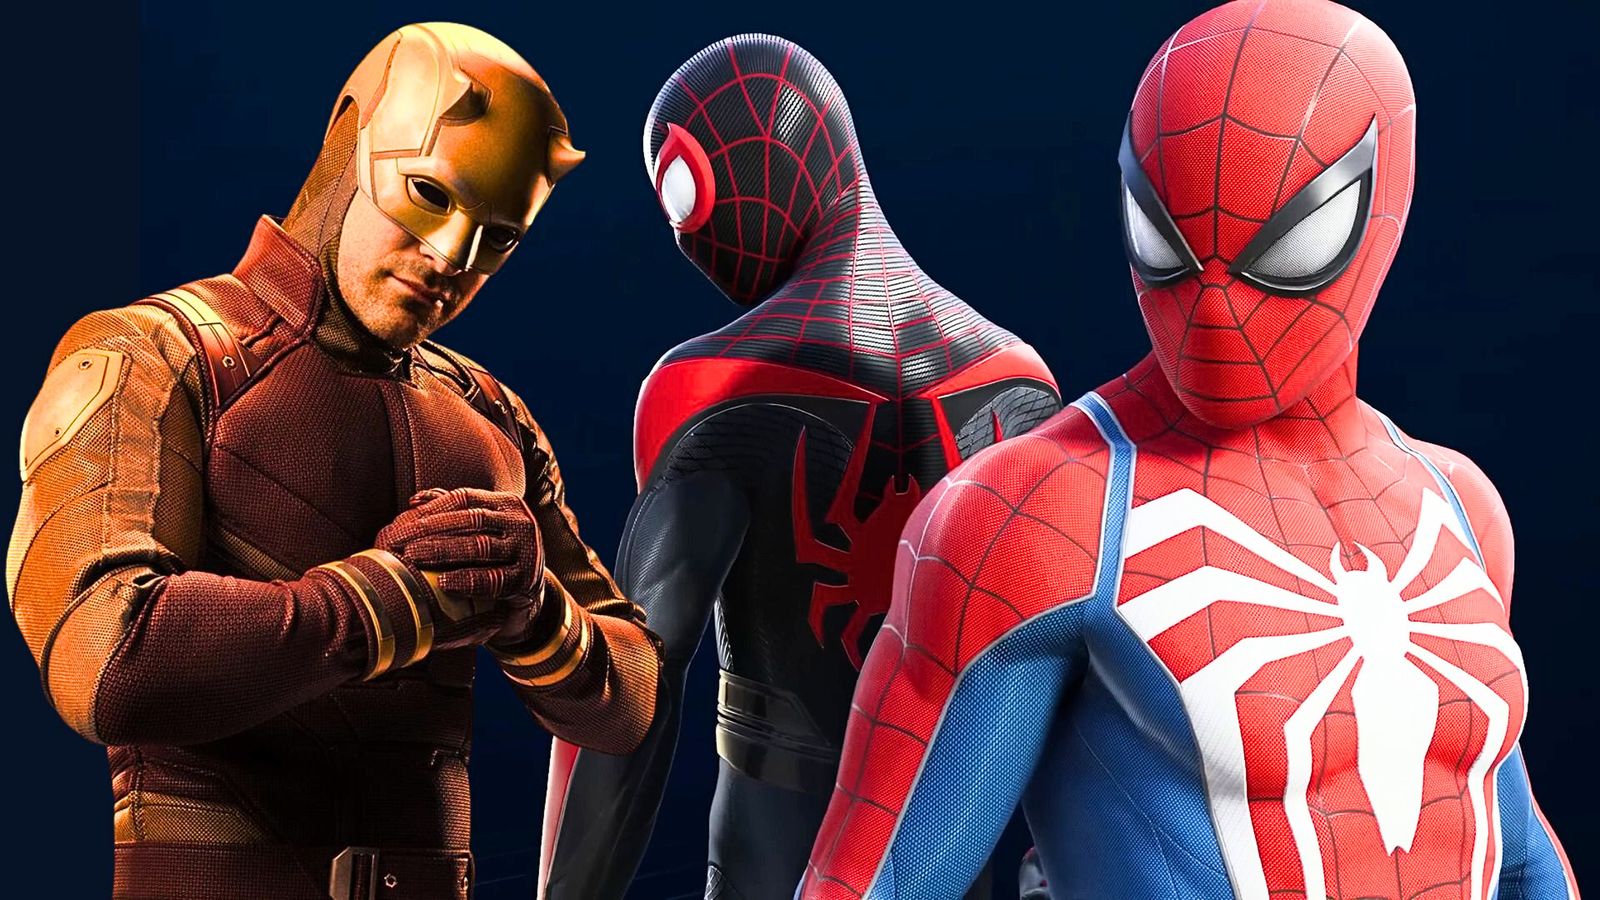 Daredevil, Miles Morales, and Peter Parker side by side